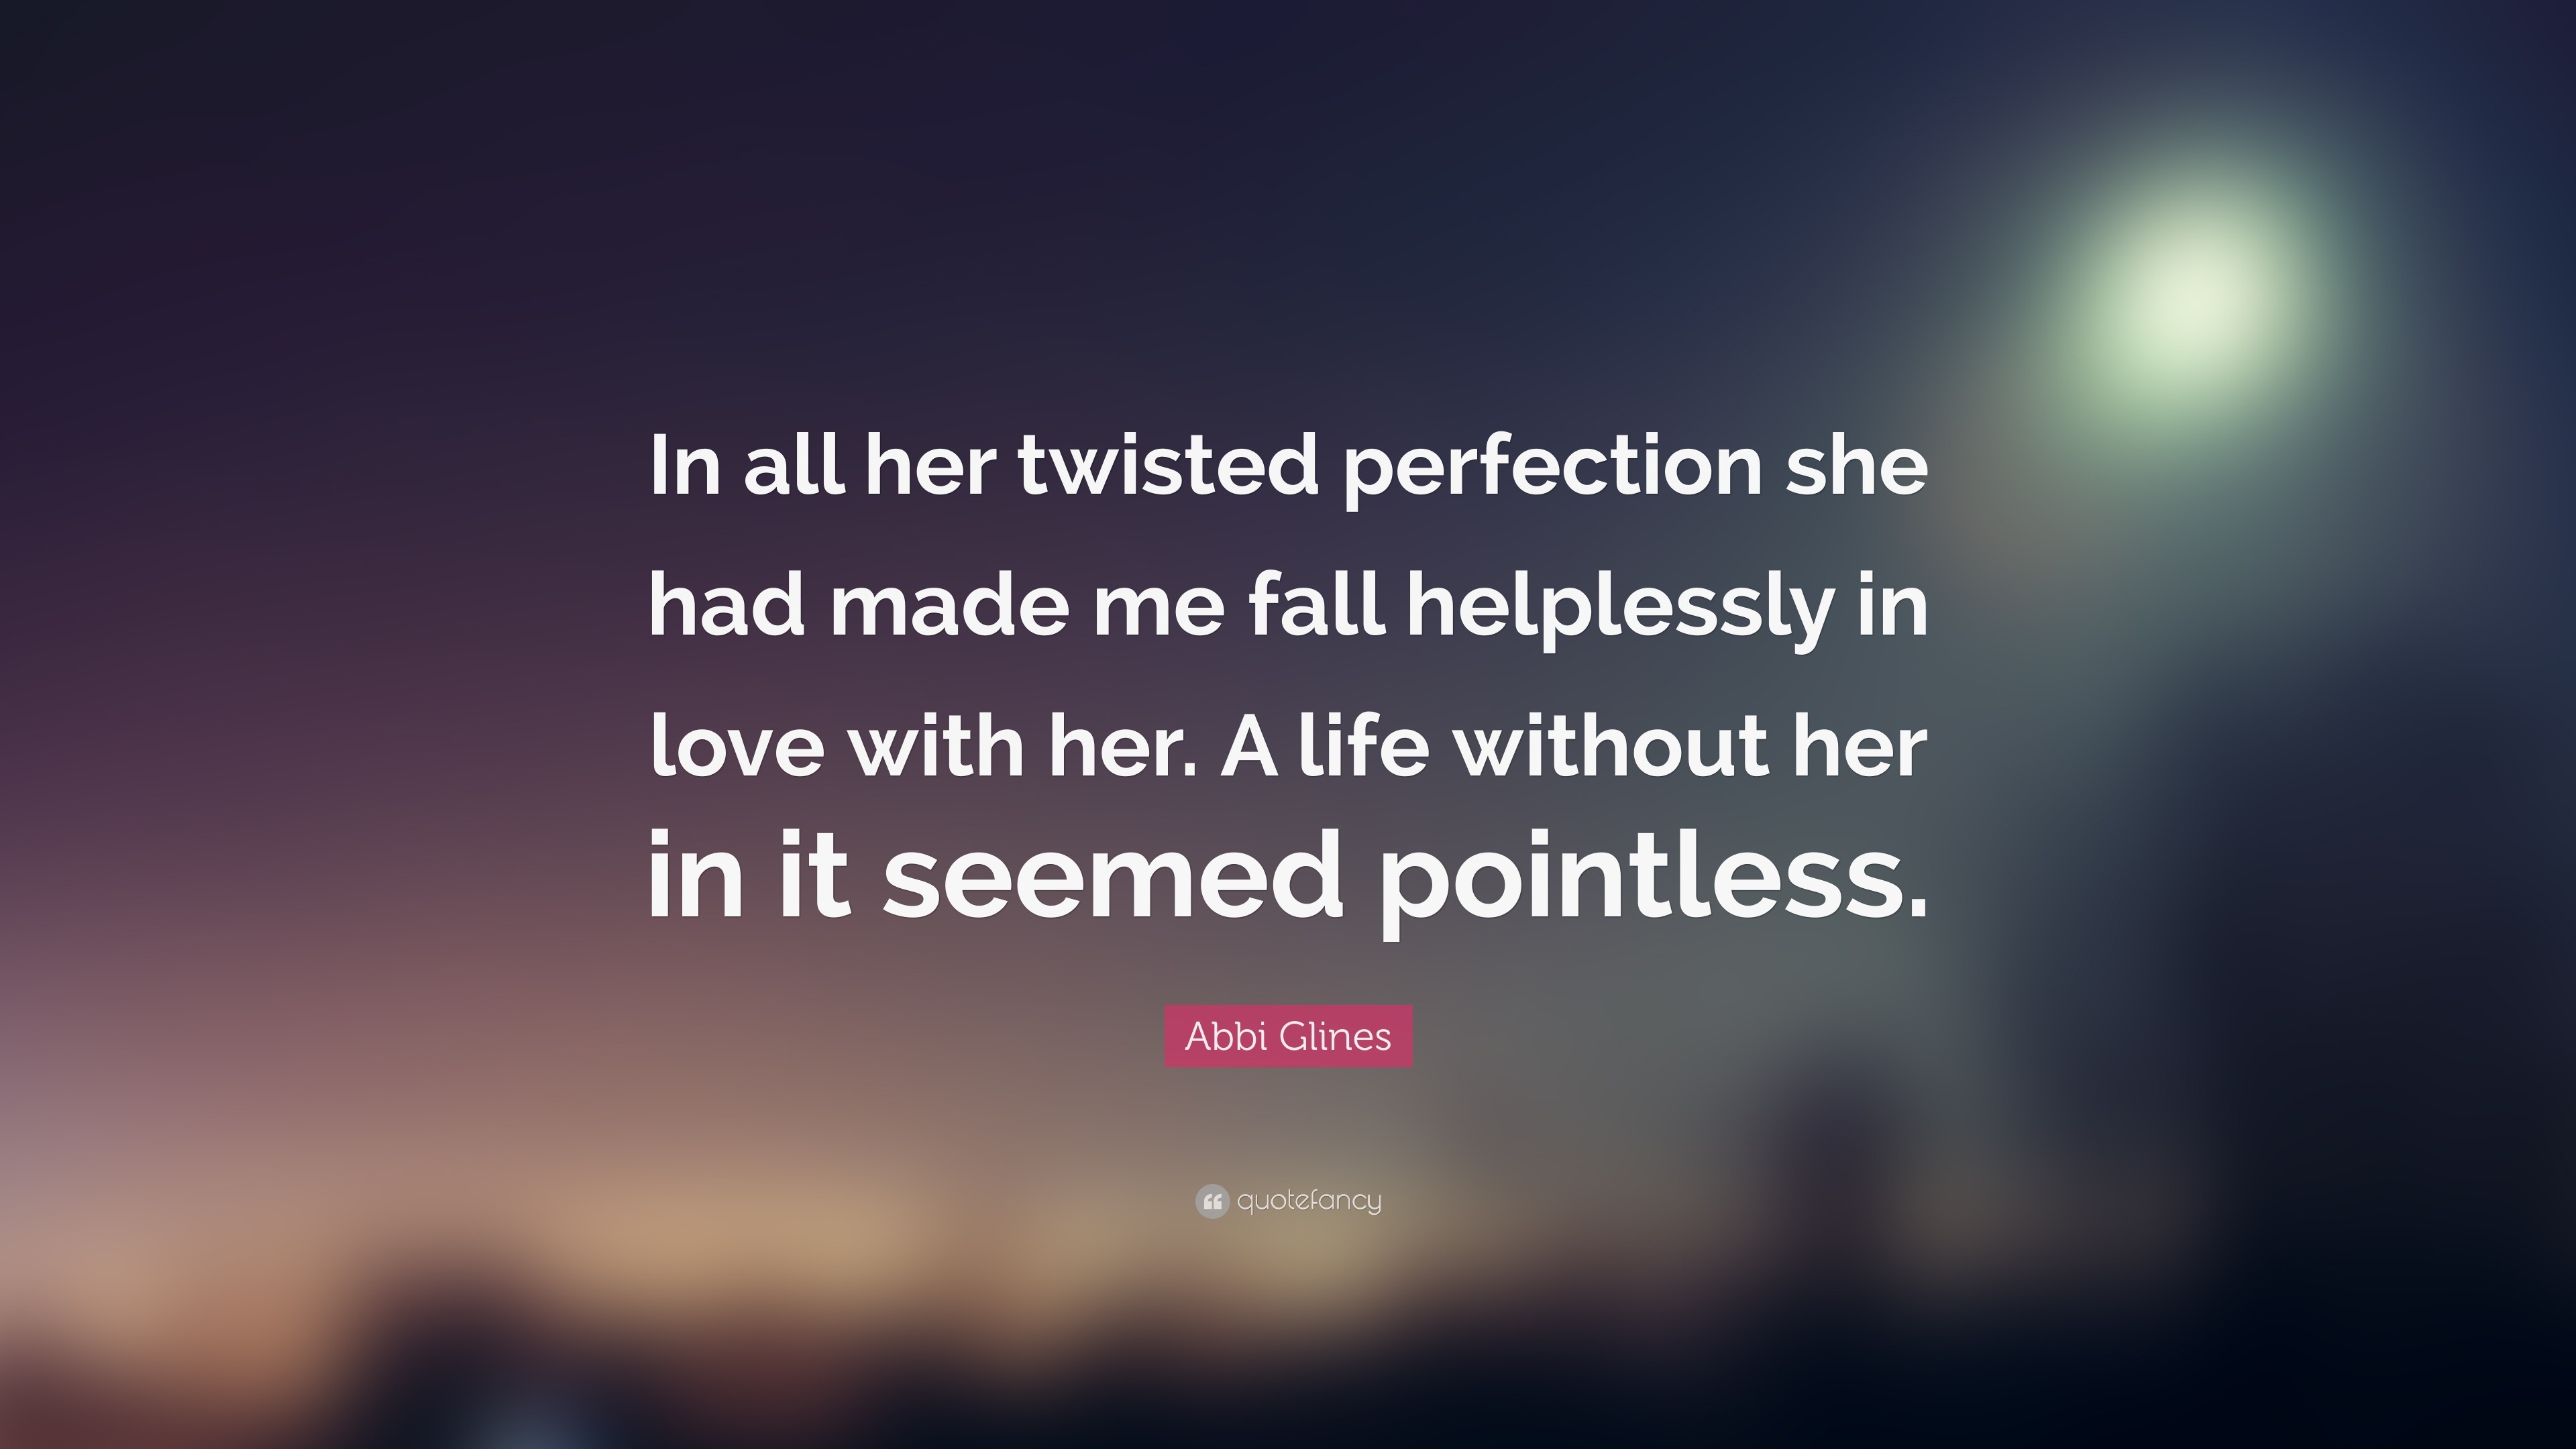 Abbi Glines Quote “In all her twisted perfection she had made me fall helplessly